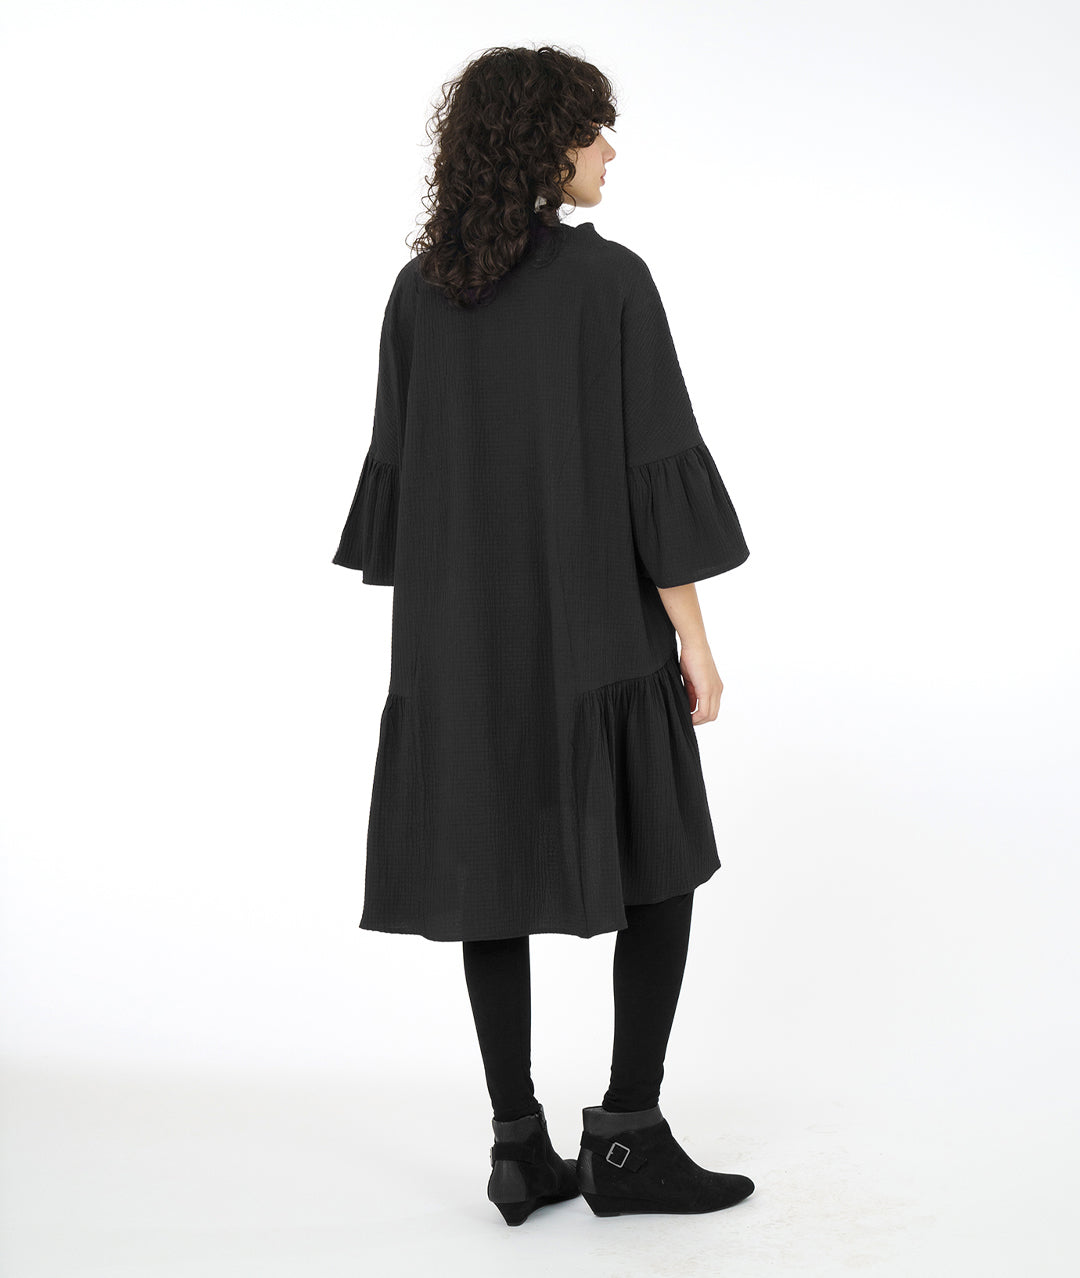 model in a black boxy dress with a cowl neck and a long ruffle at the skirt and sleeves